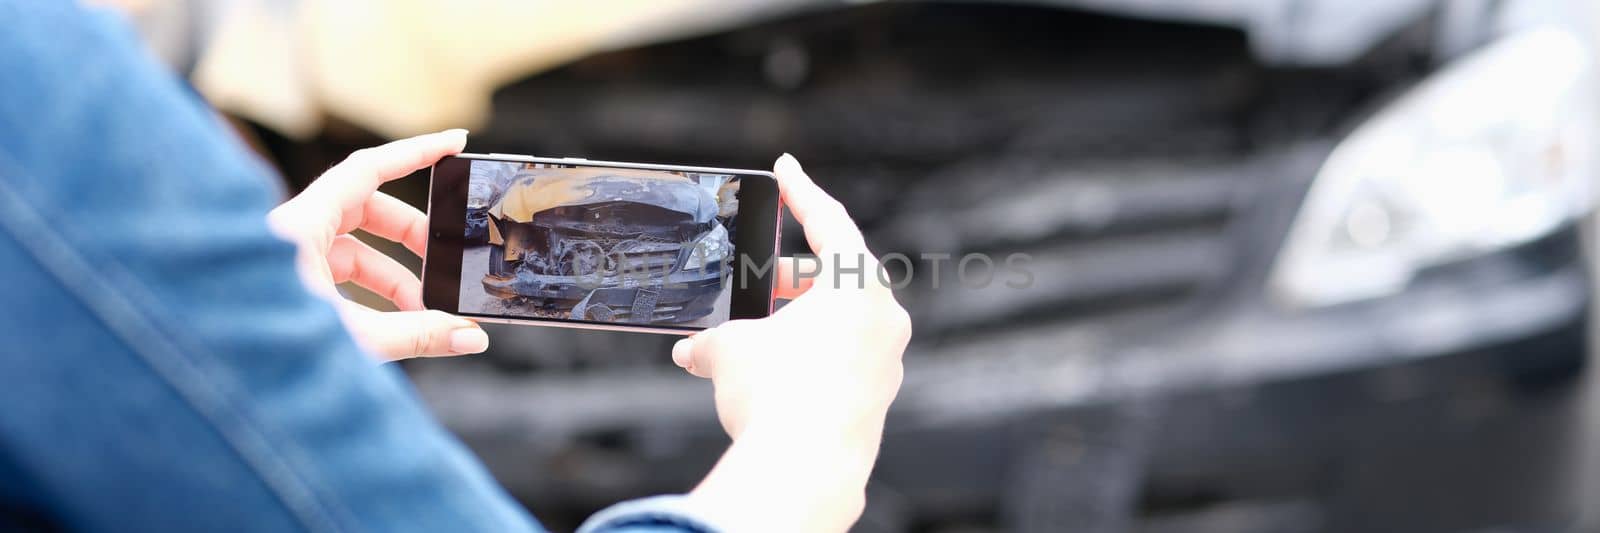 Person photographs burnt car on smartphone closeup by kuprevich